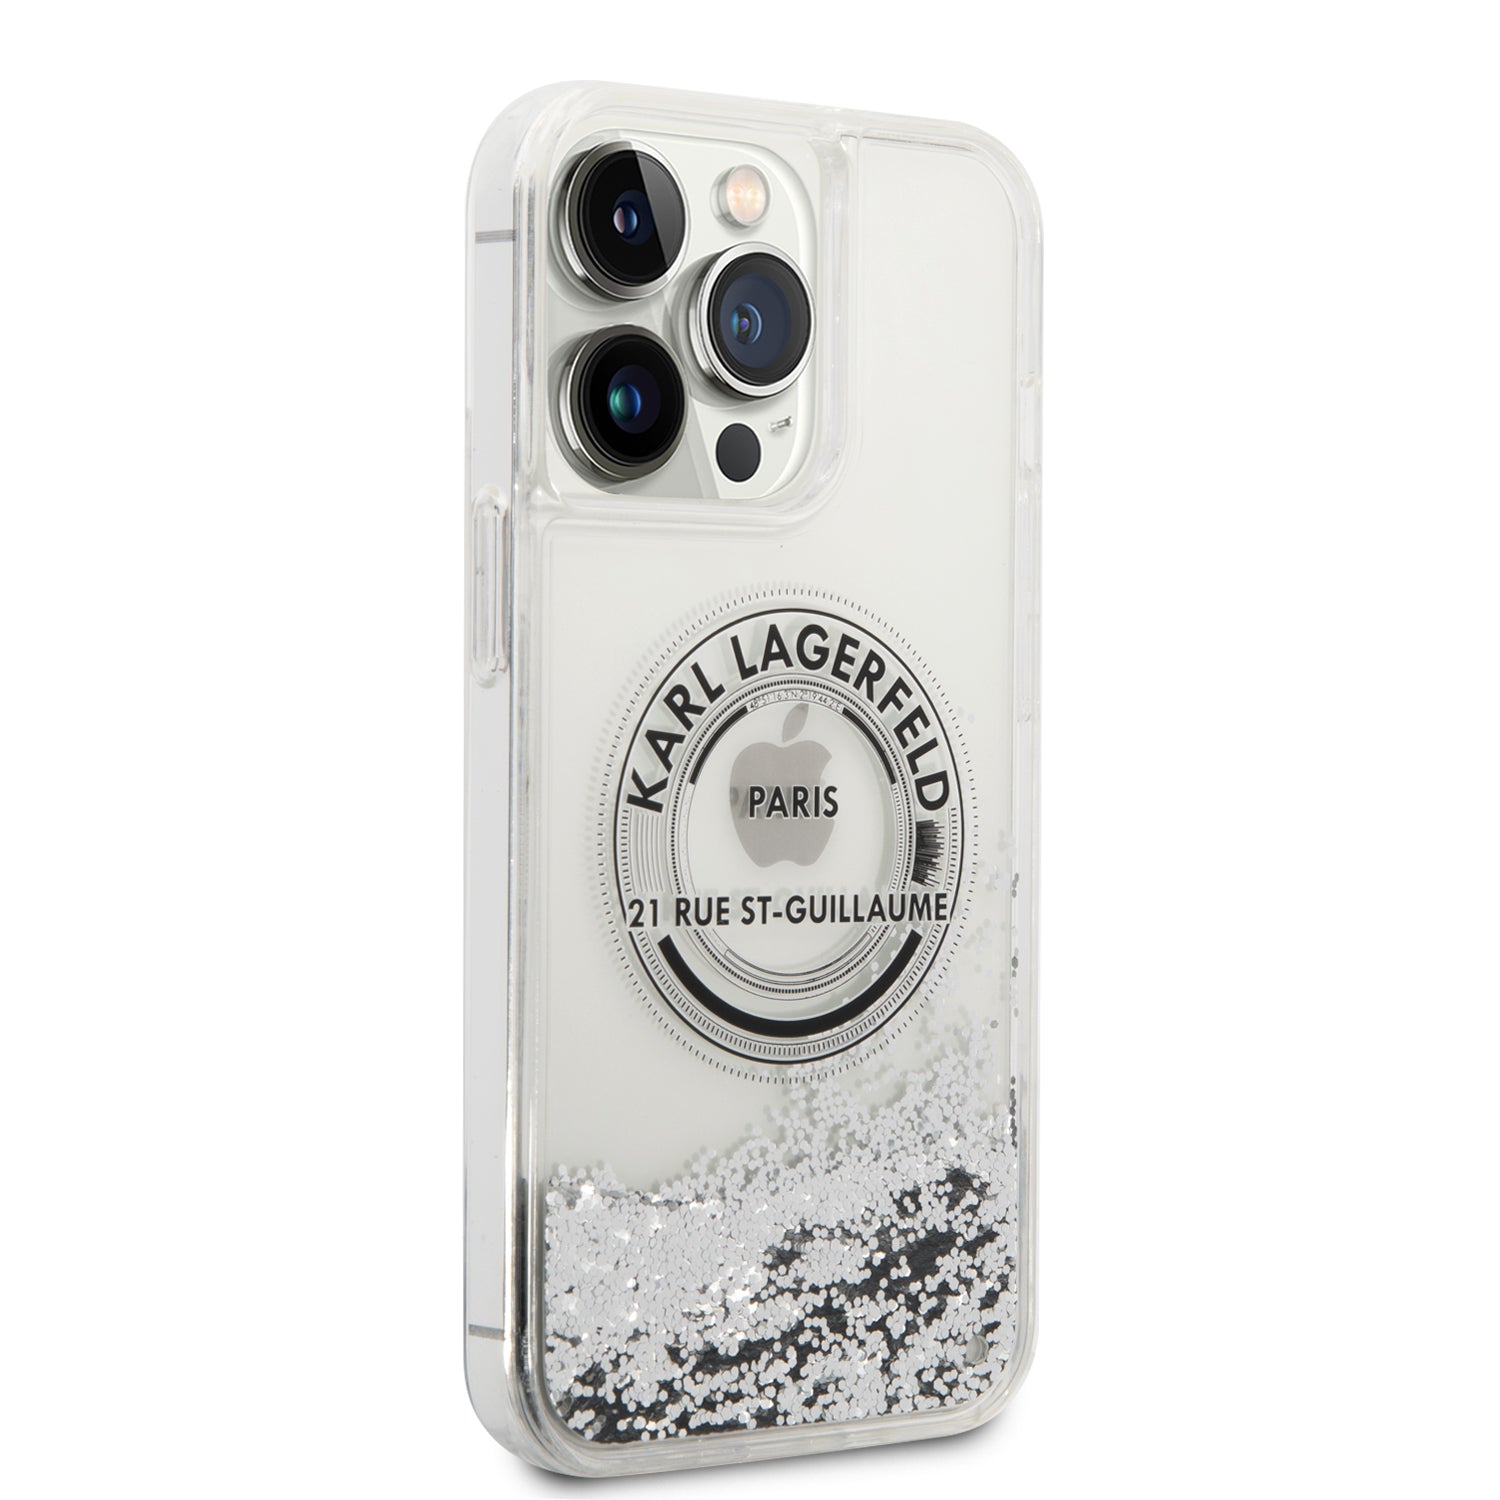 Women's Karl Signature iPhone 14 Pro Max Card Slot Case by KARL LAGERFELD